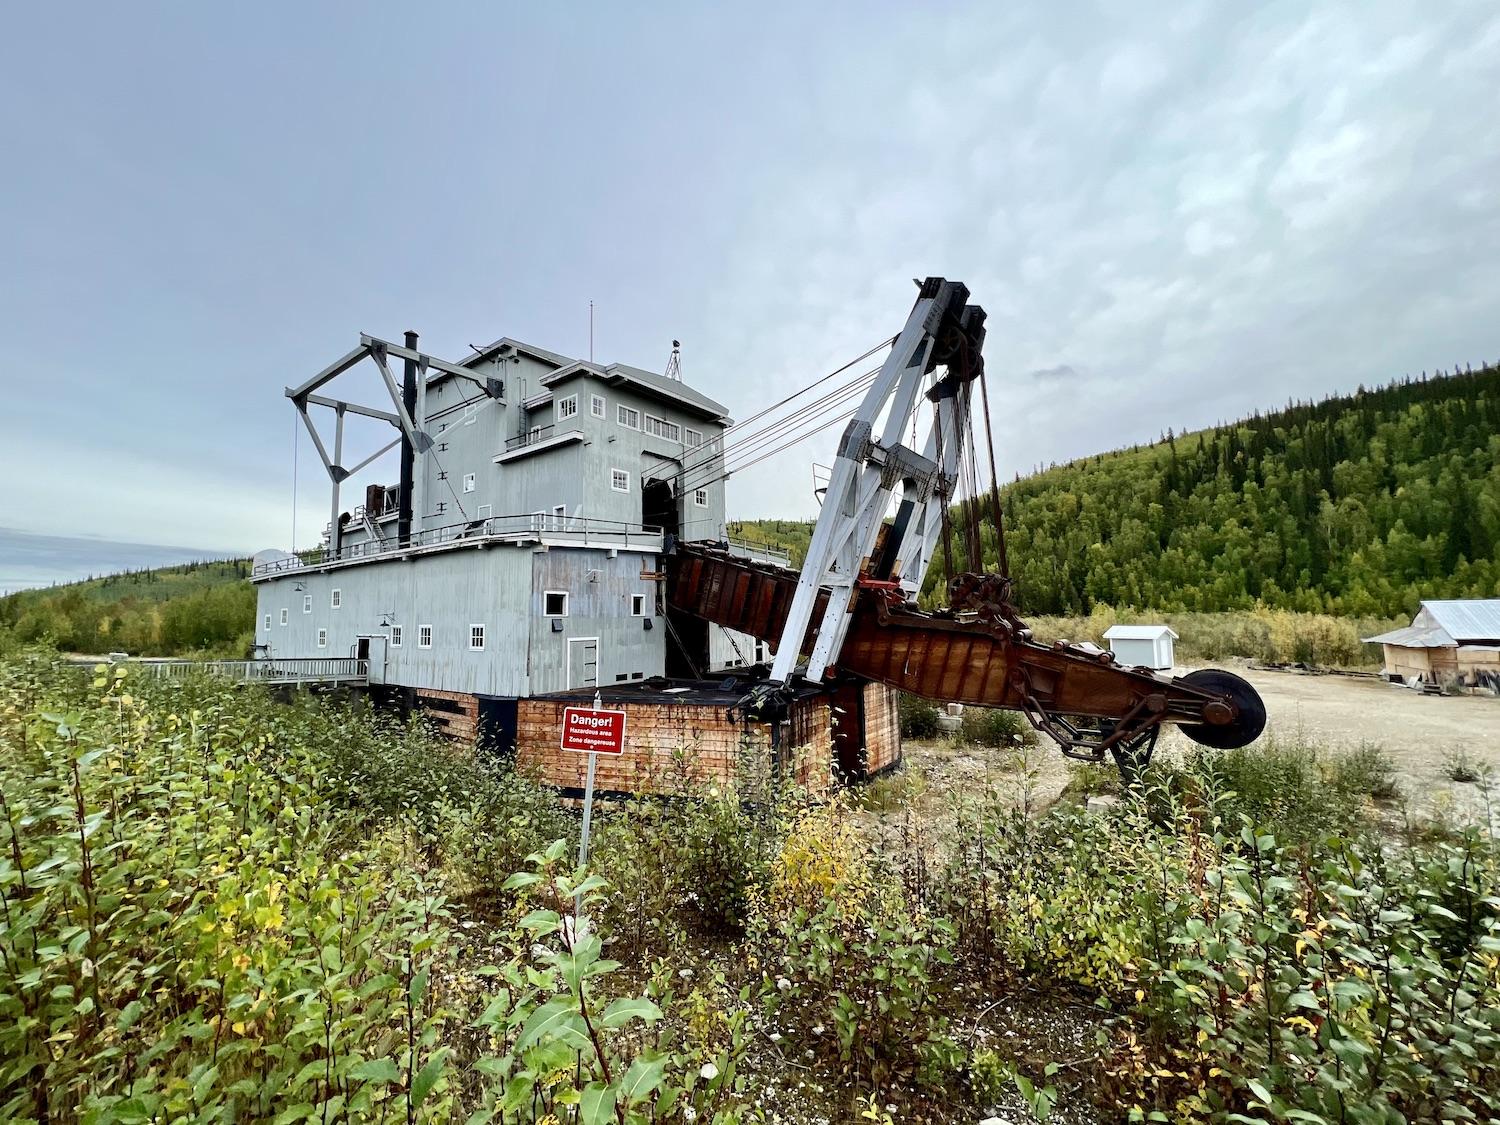 Dredge No. 4 is two-thirds the size of a football field and was once used to extract gold from the ground in the Yukon.